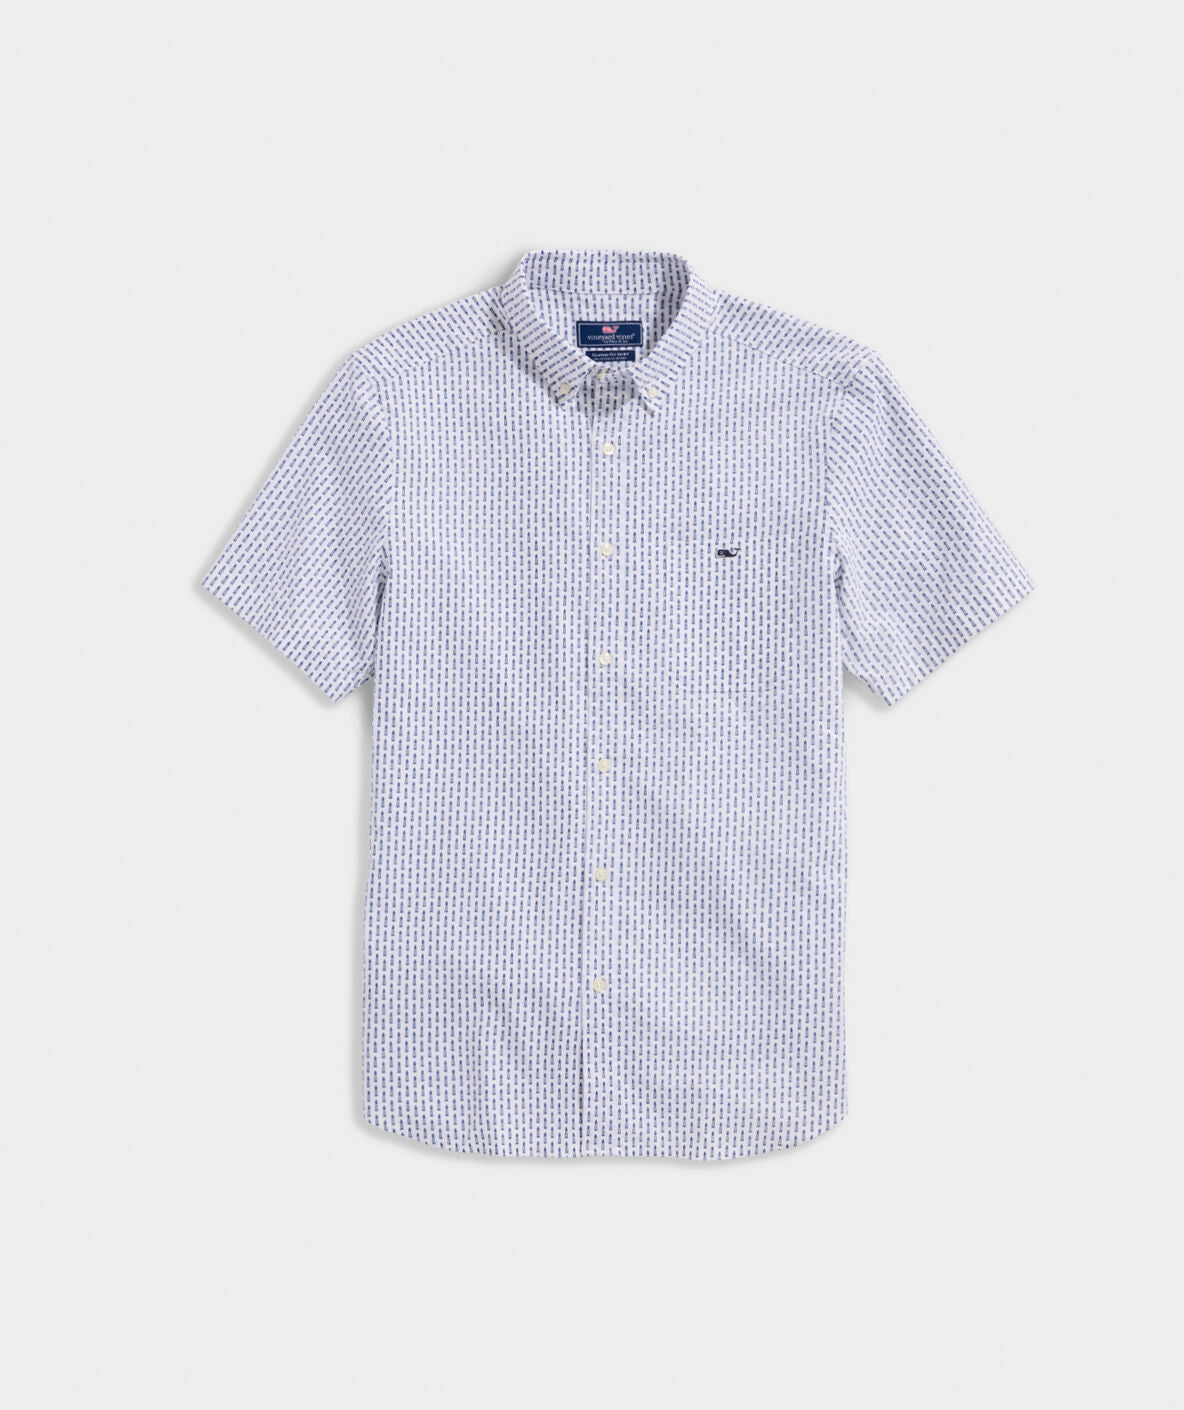 Classic Fit Lighthouse Print Short-Sleeve Shirt in Stretch Cotton